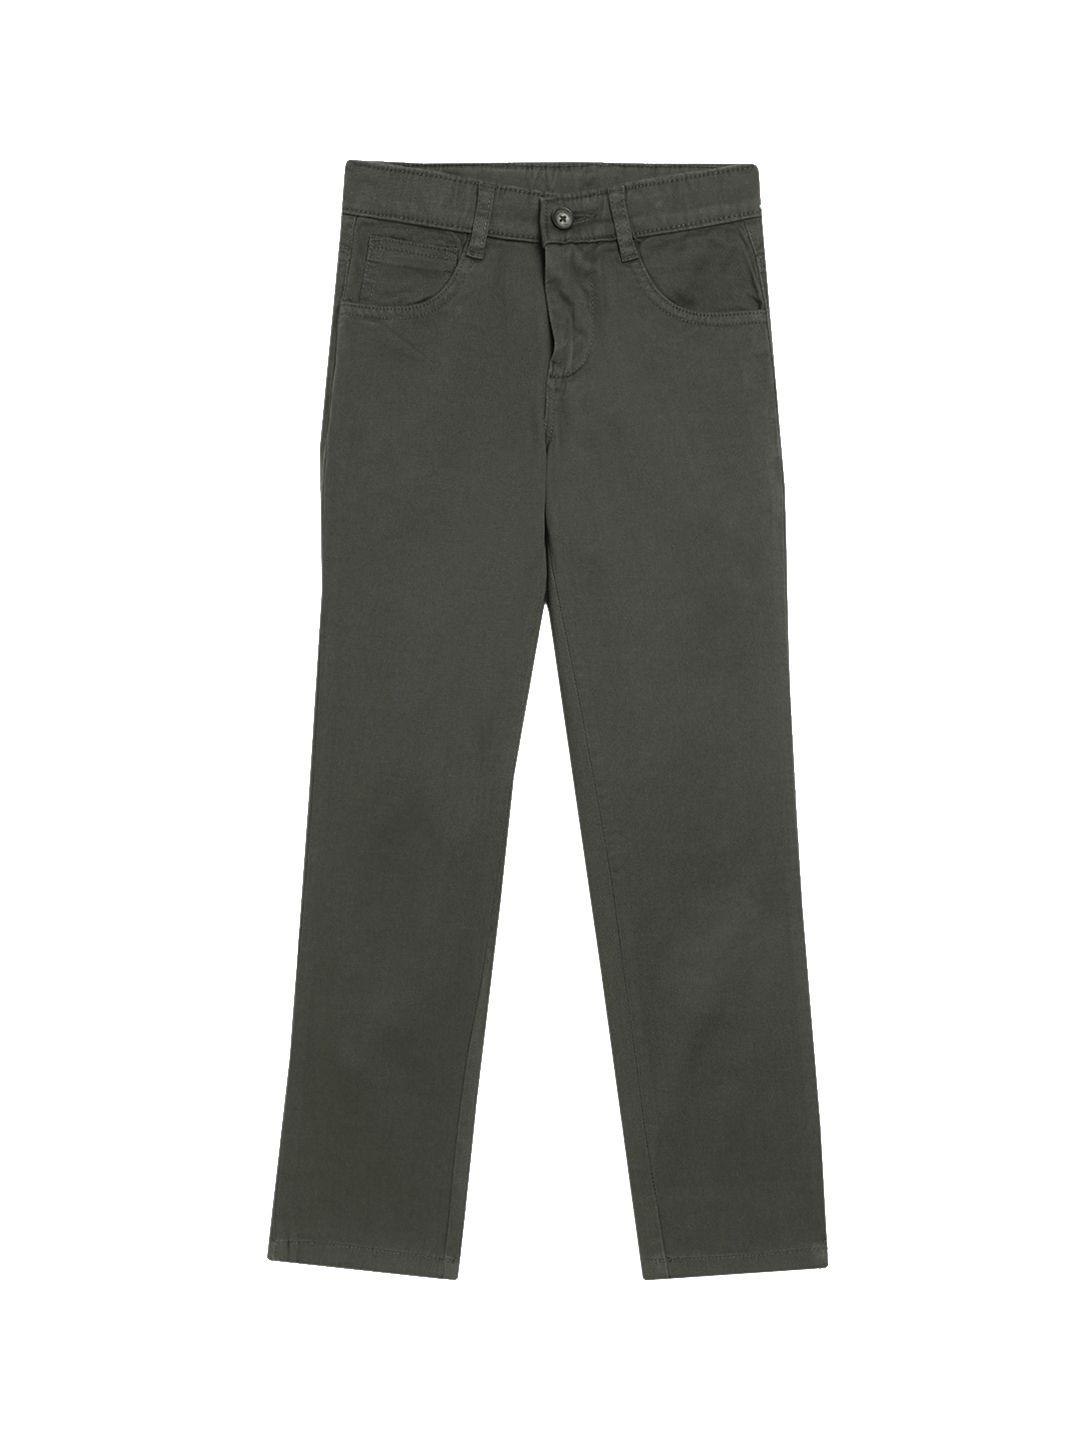 cantabil-boys-olive-green-chinos-trousers